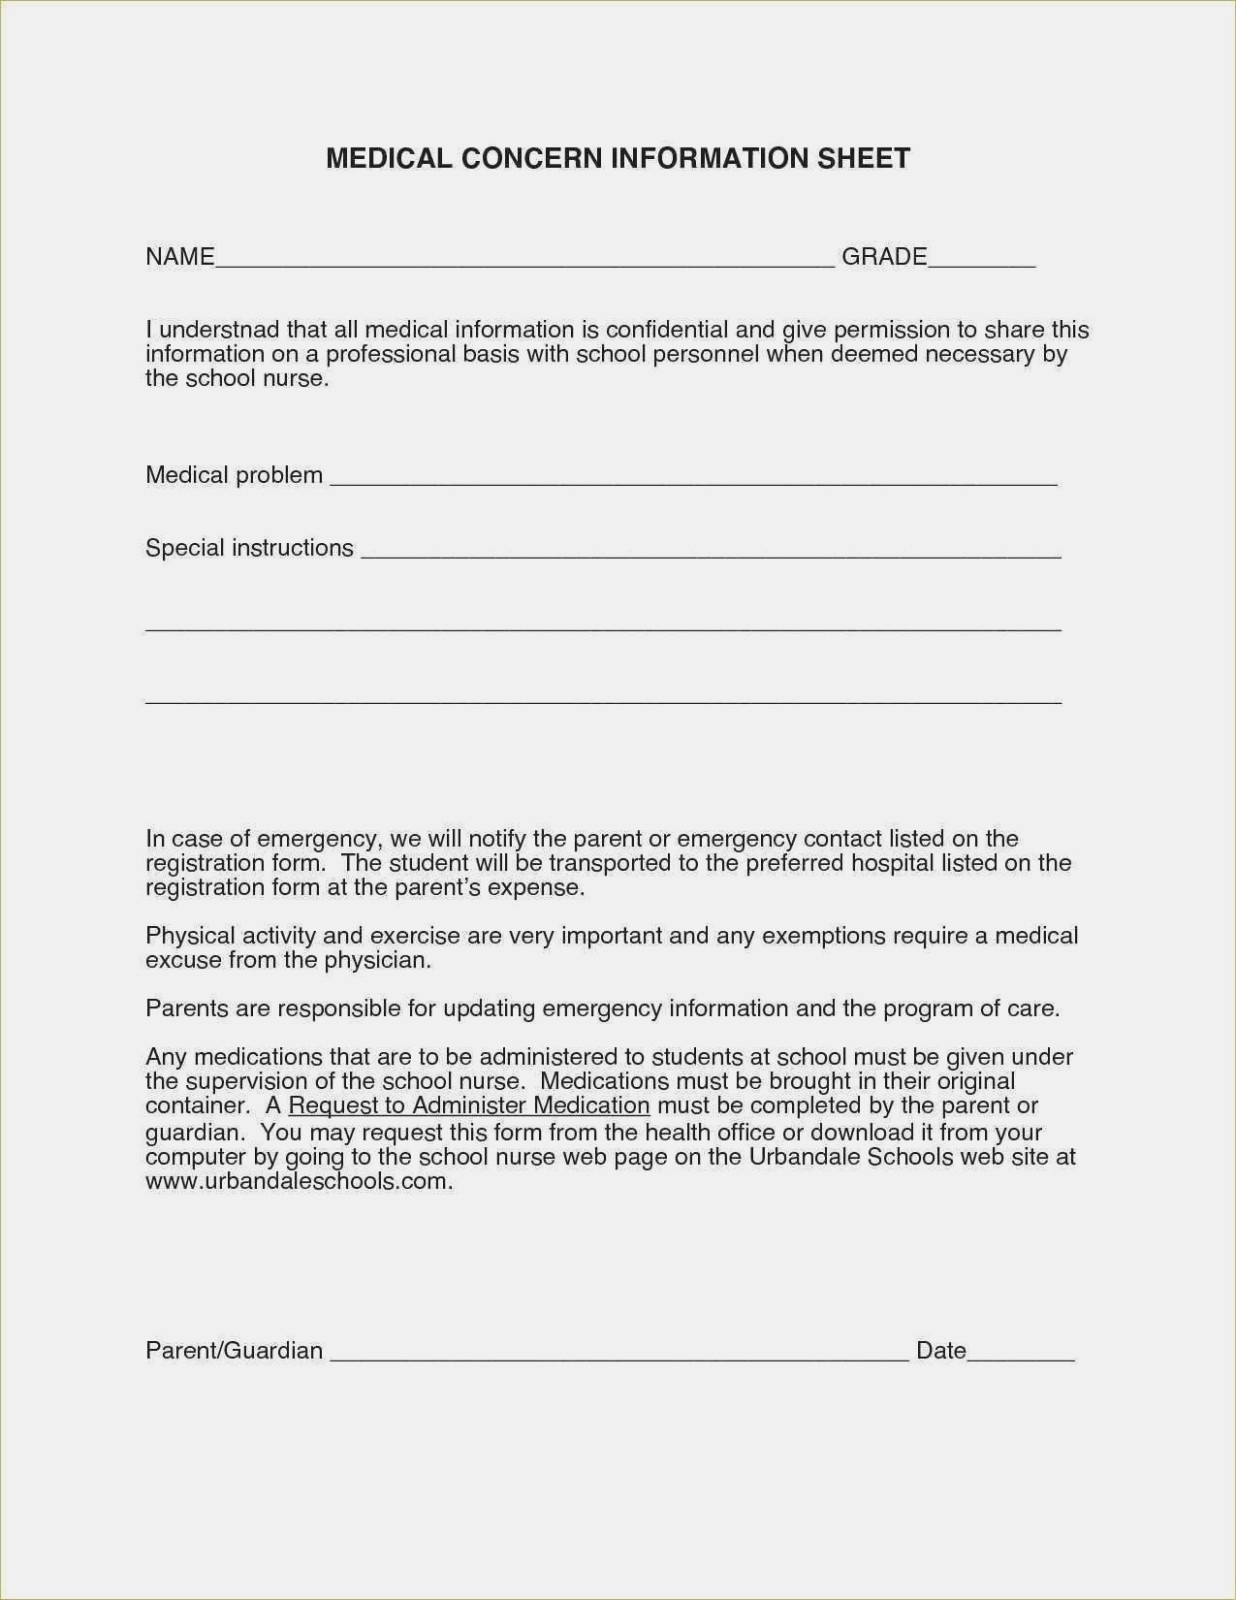 The Reasons Why We Love Free Printable | Invoice Template - Free Printable Medical Consent Form